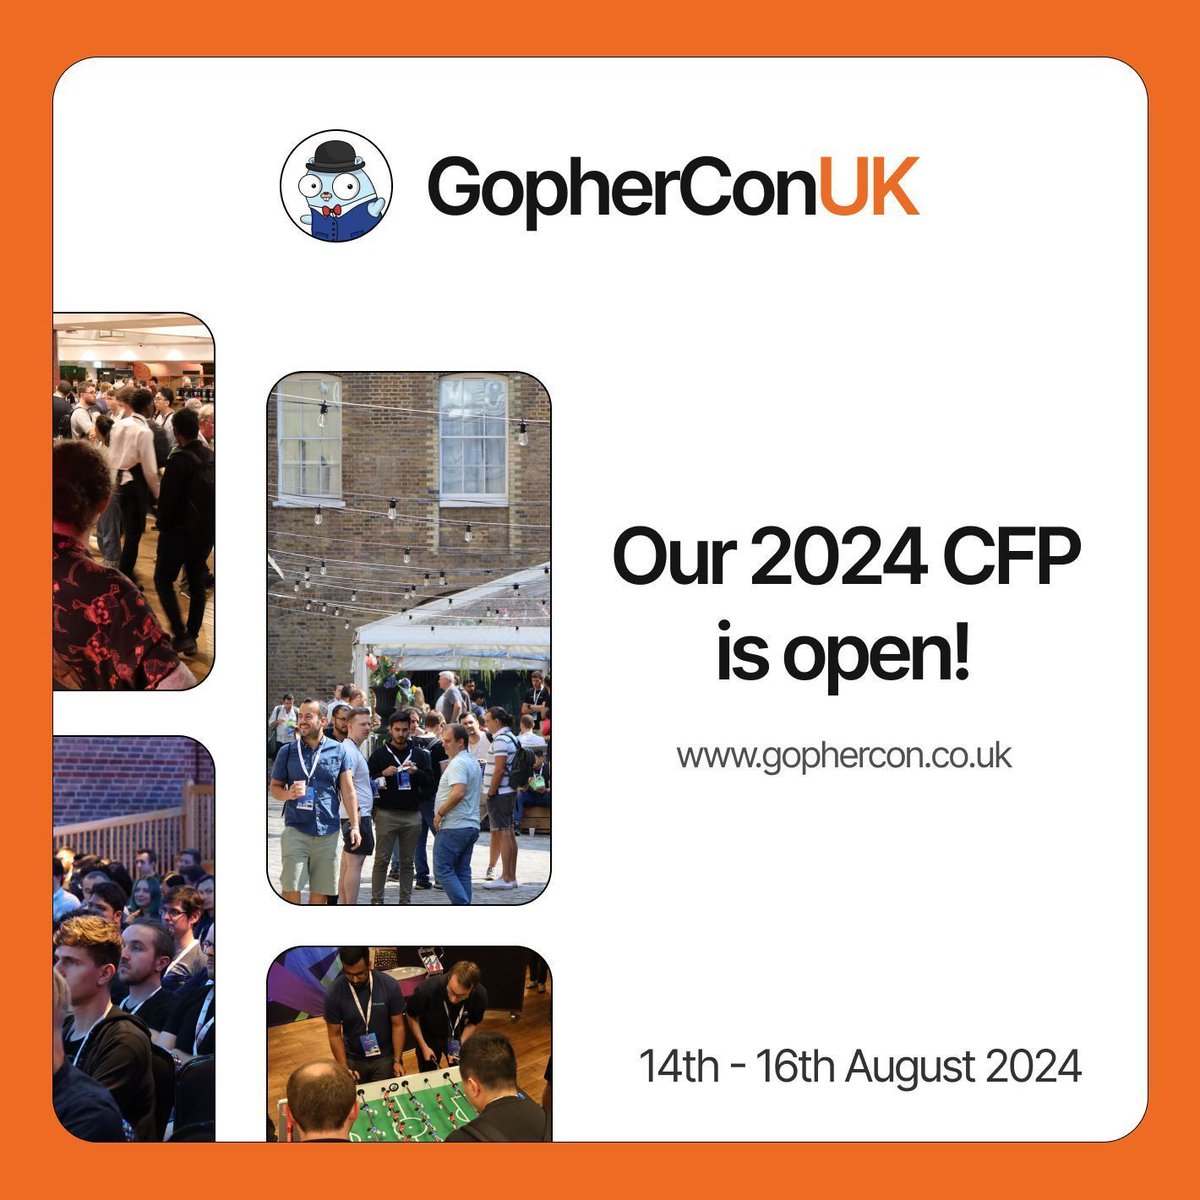 📢 Our CFP for 2024 is open! Submit your talk papers today and be in with a chance to deliver a talk at GopherCon UK 2024. Find out more here - buff.ly/3VsVFZr #gopherconuk24 #gopherconuk #golang #goprogramming #techtalks